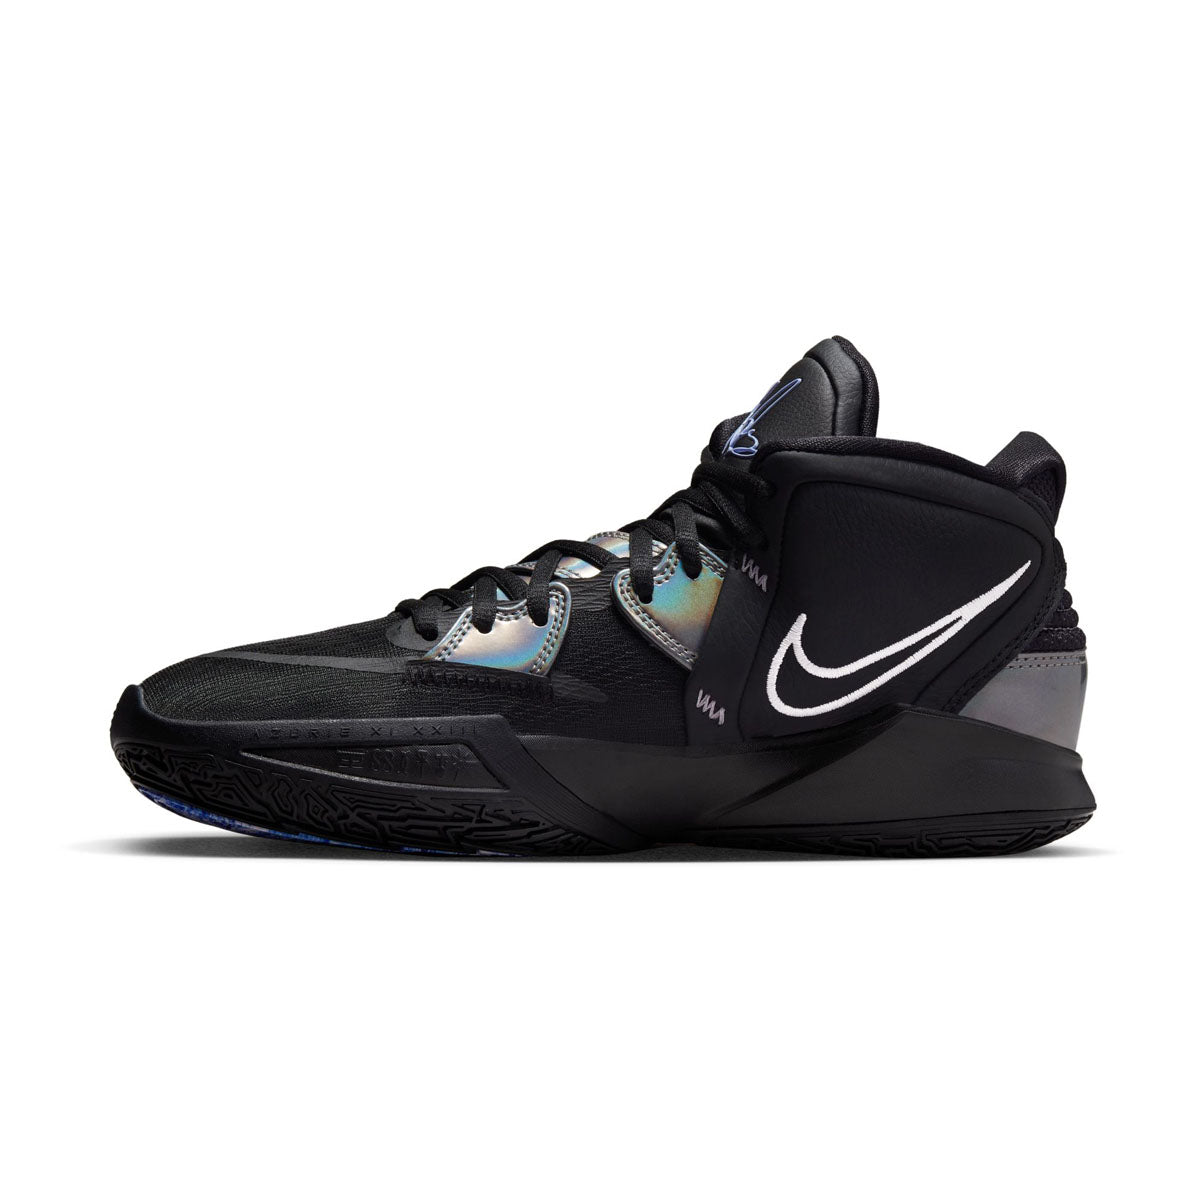 Kyrie Infinity Basketball Shoes